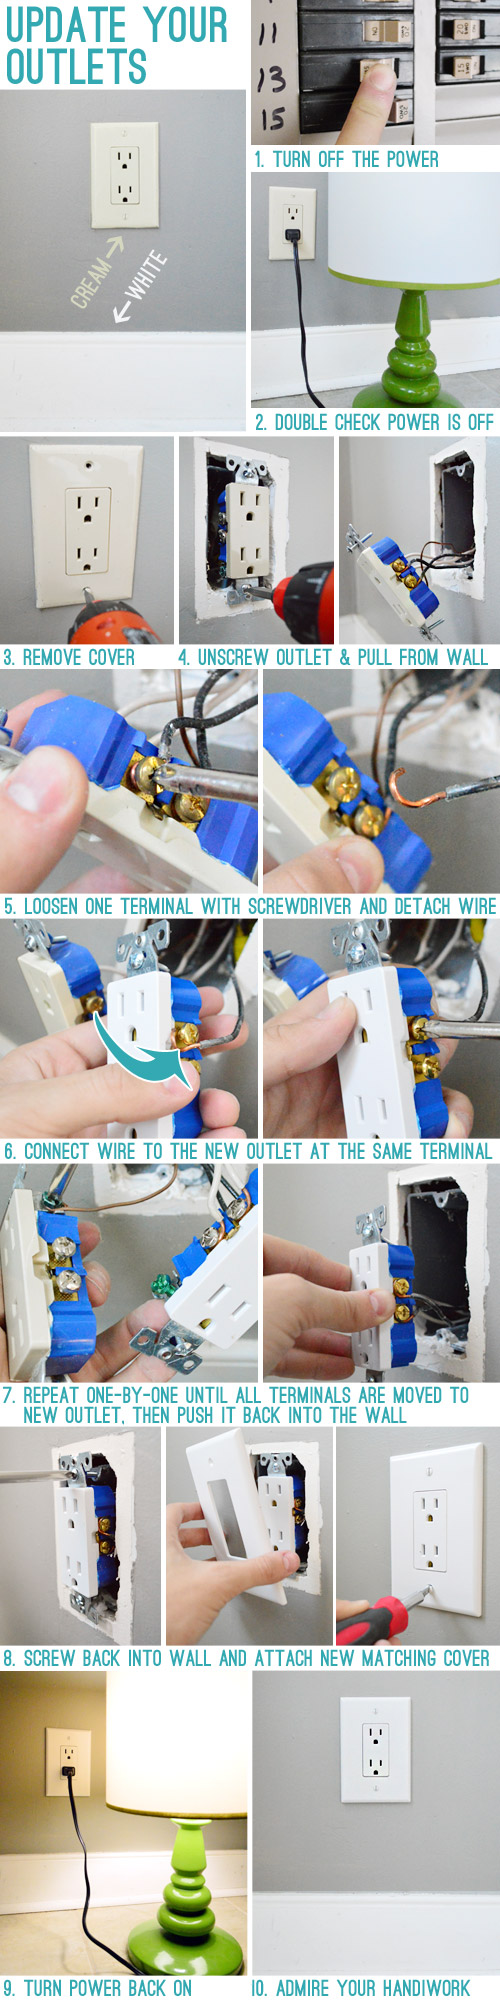 YHL How To Change Your Outlets